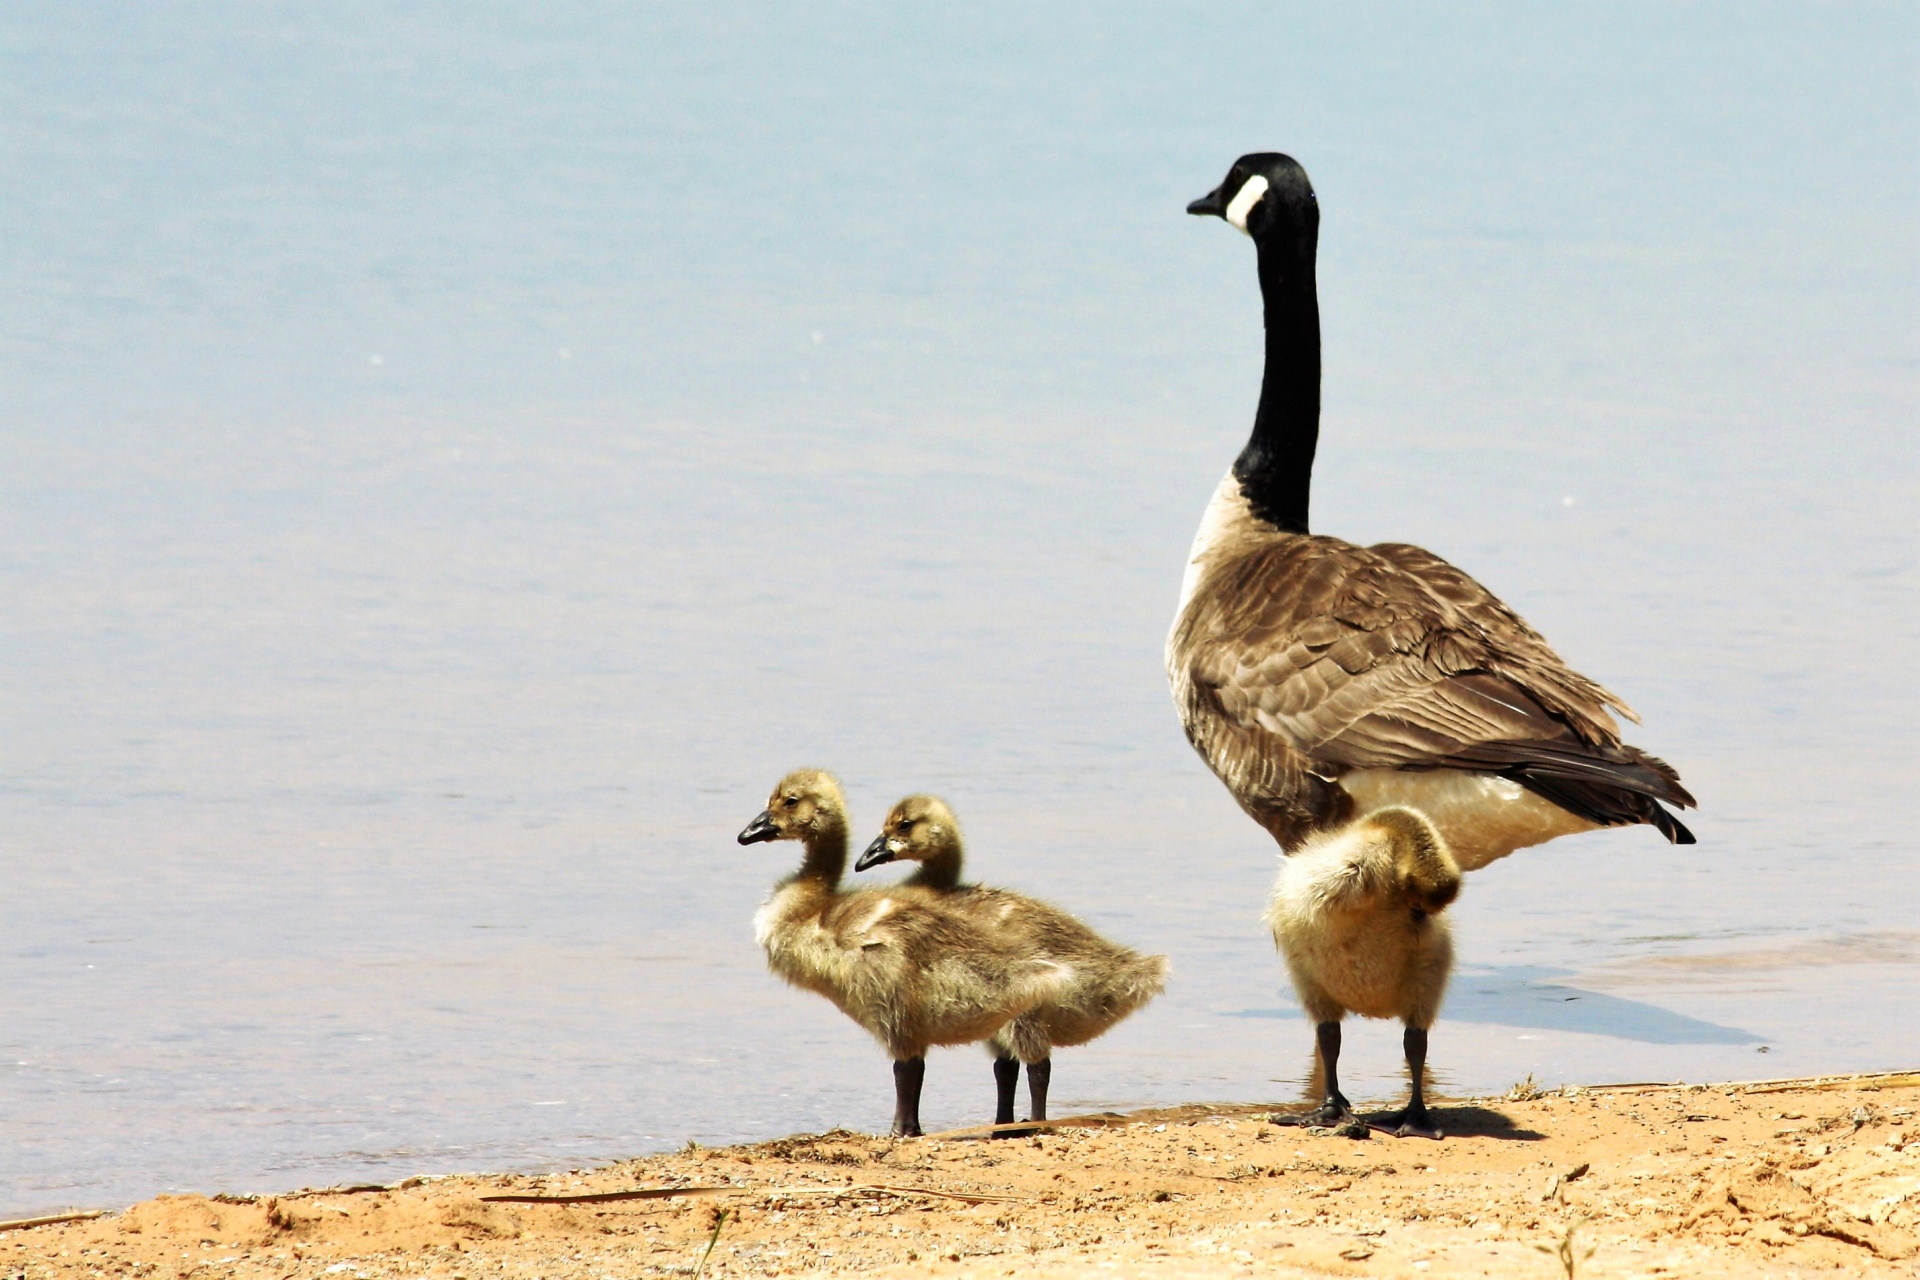 A mother Canada goose and her three little yellow goslings are standing on the sandy shore of a lake, looking out over the blue water.